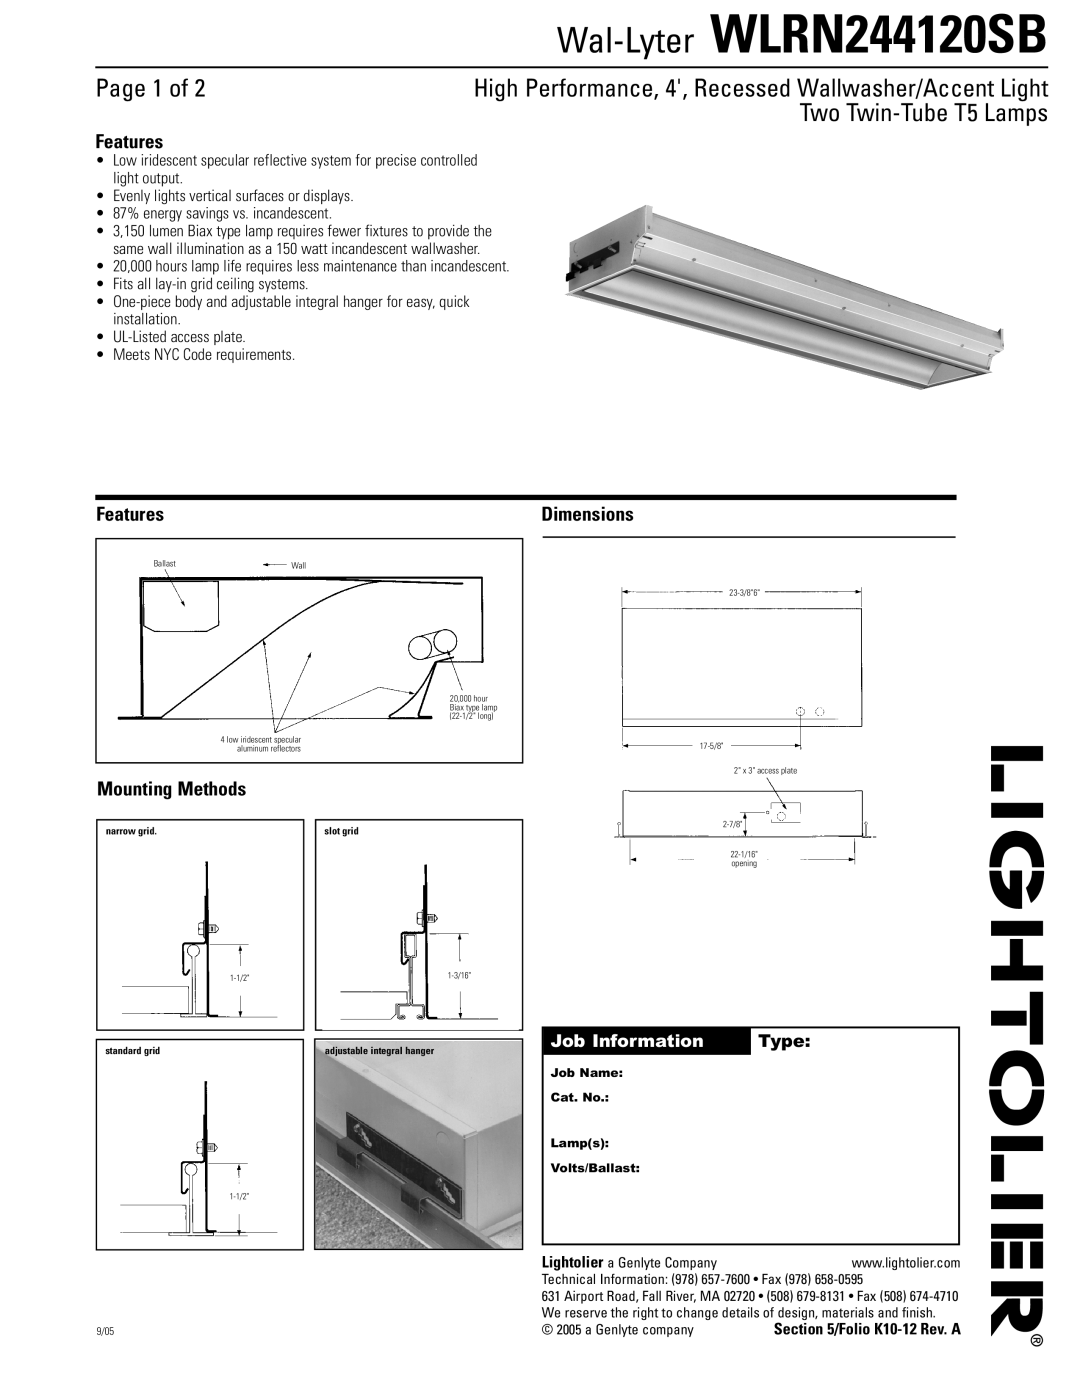 Lightolier WLRN244120SB dimensions Page 1 of, Two Twin-TubeT5 Lamps, Features, Mounting Methods, Dimensions, Type 